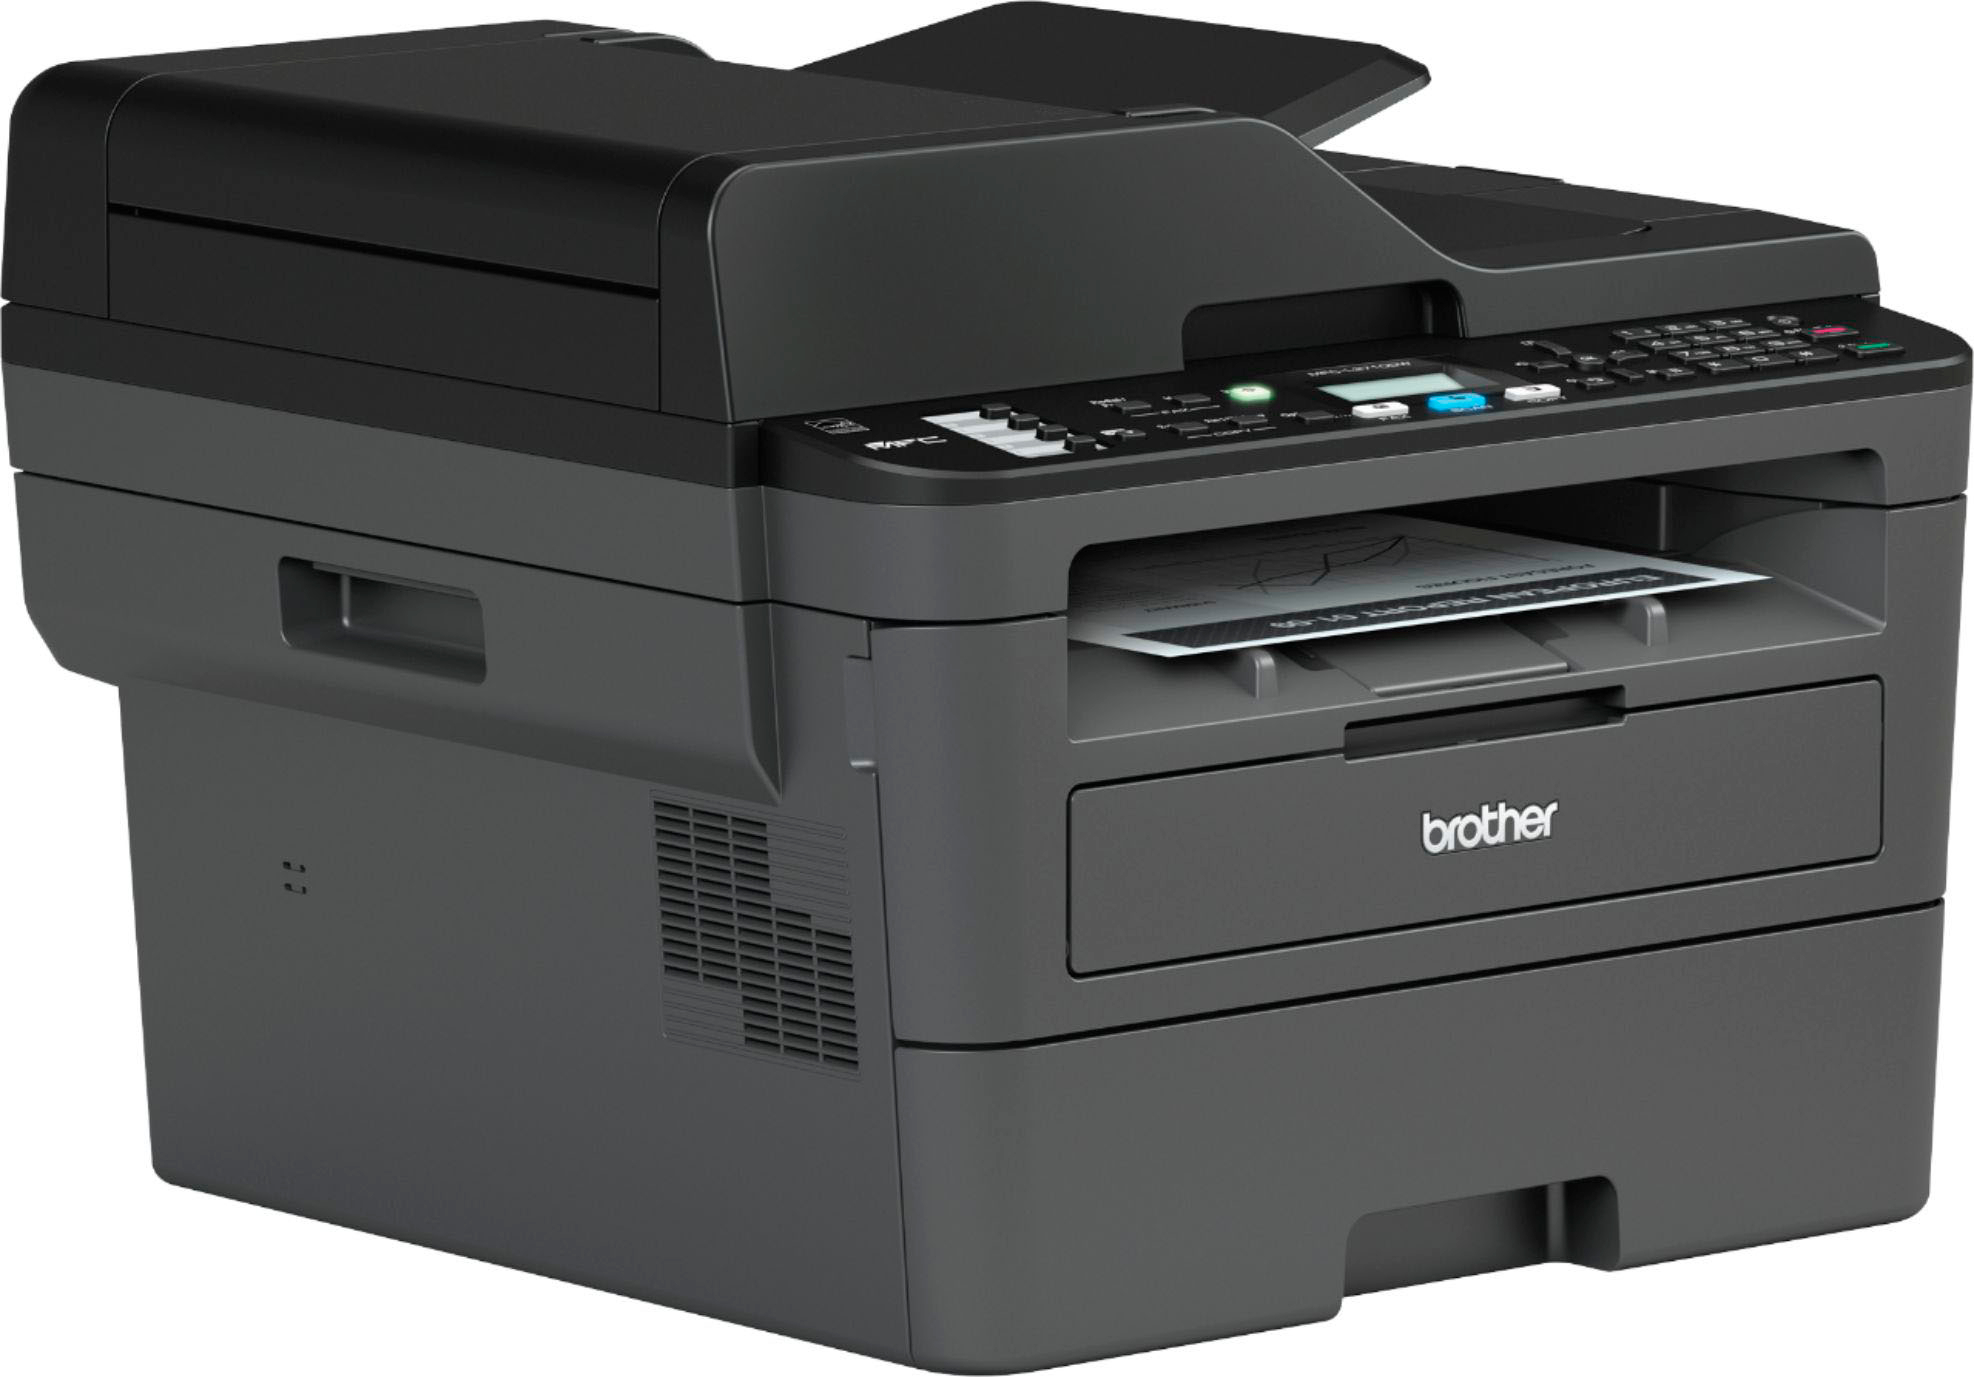 Brother MFC-L2717DW All-in-One Monochrome Laser Printer